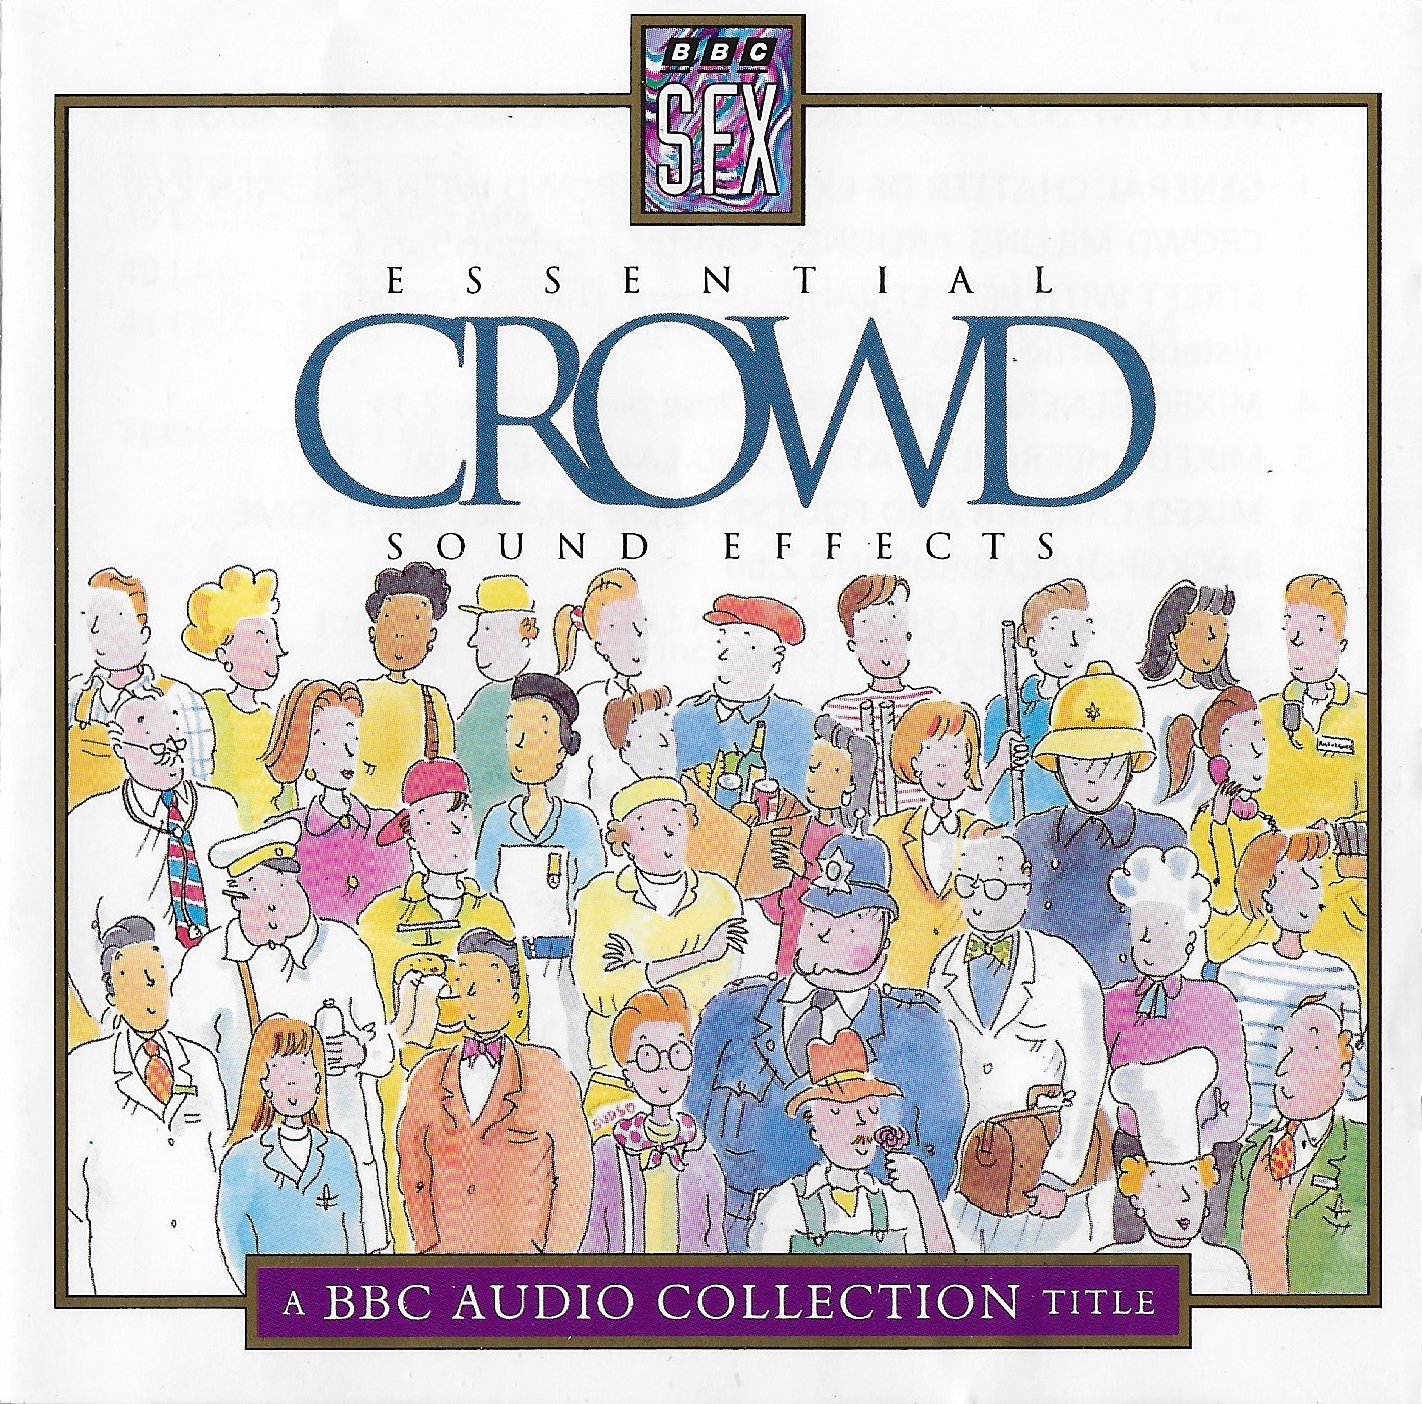 Picture of BBCCD862 Essential crowd sound effects by artist Various from the BBC cds - Records and Tapes library